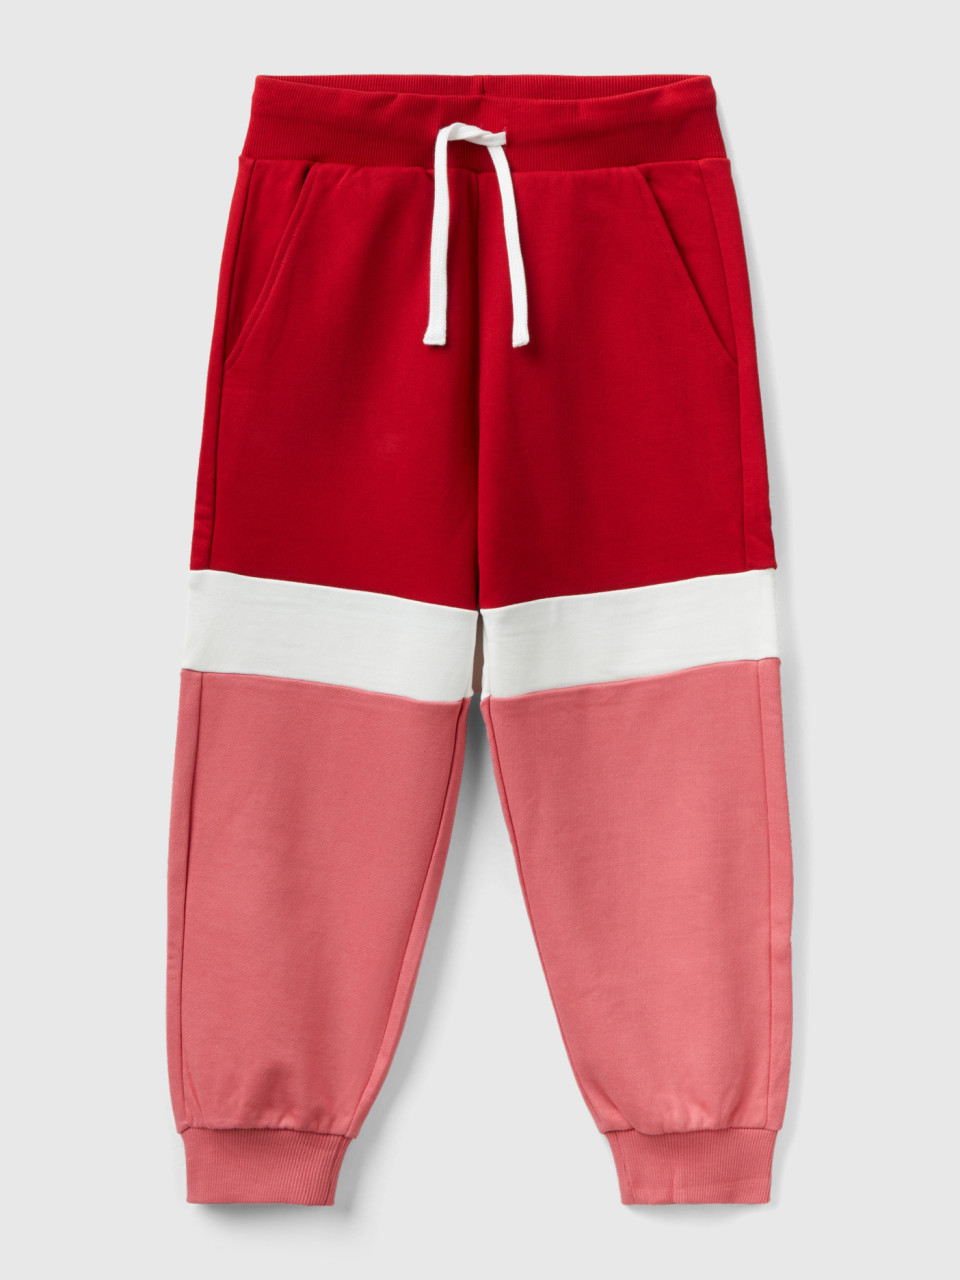 Benetton, Pink And Red Joggers, Brick Red, Kids